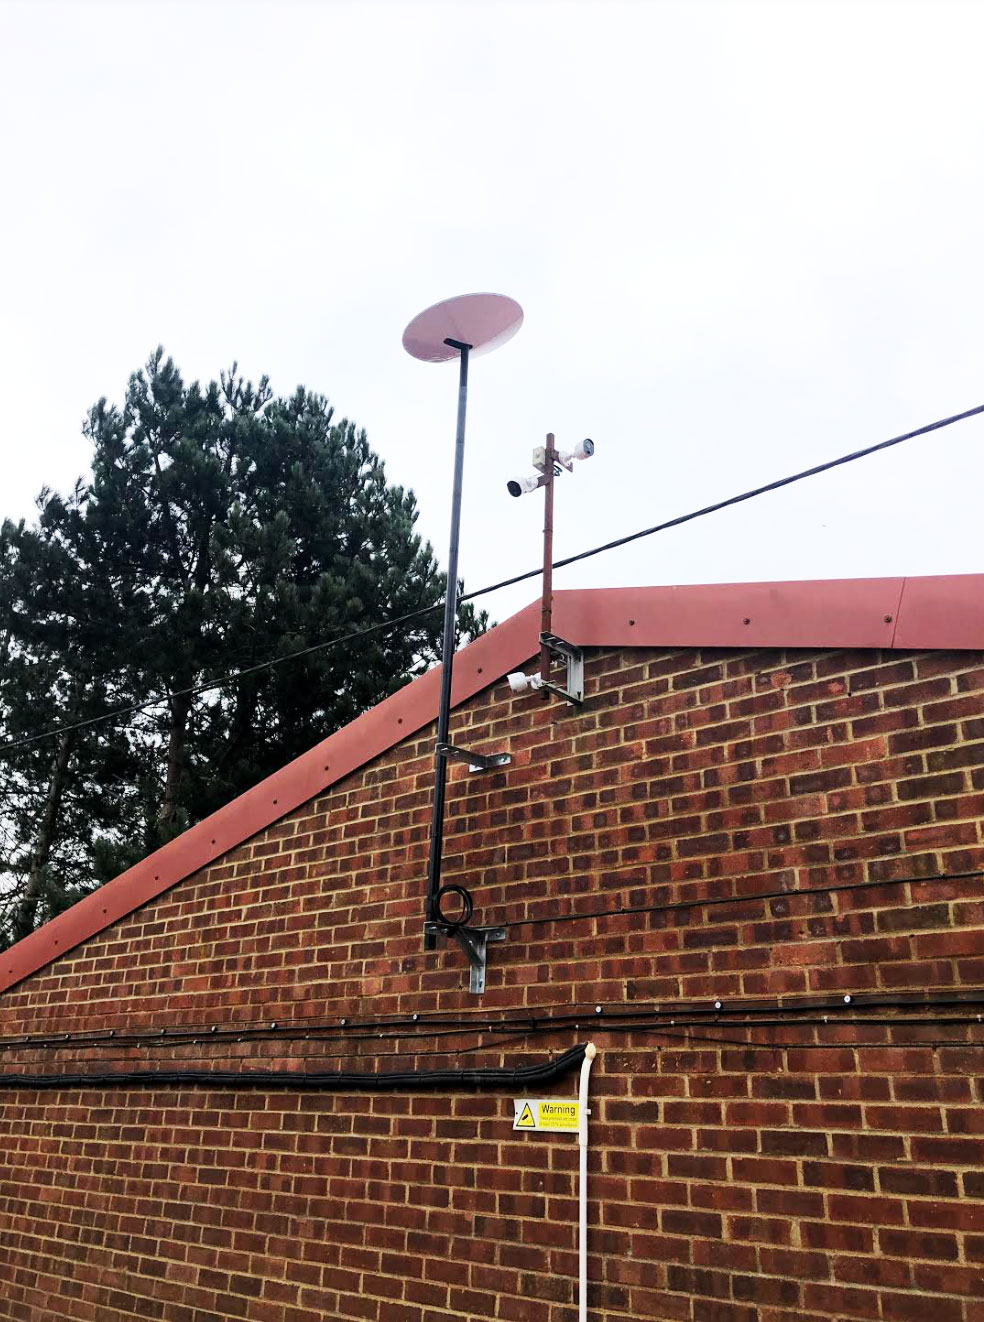 Commercial installation of starlink dish in Great Horwood, Milton Keynes for a vending company with zero internet provided by BT in the middle of nowhere.